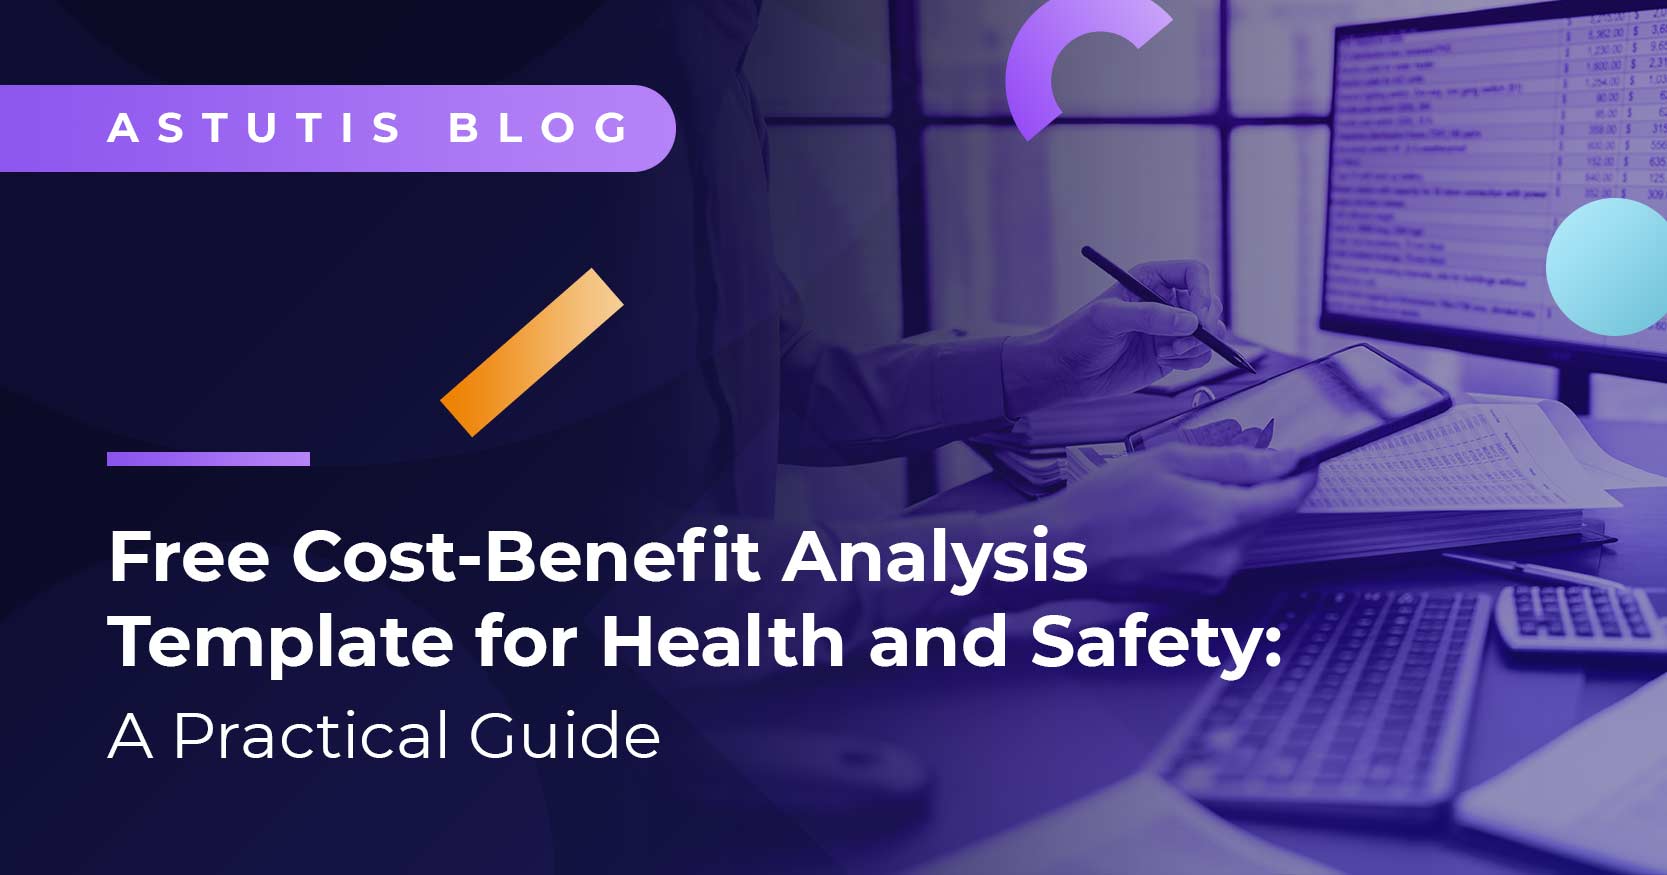 Free Cost-Benefit Analysis Template for Health and Safety: A Practical Guide Image